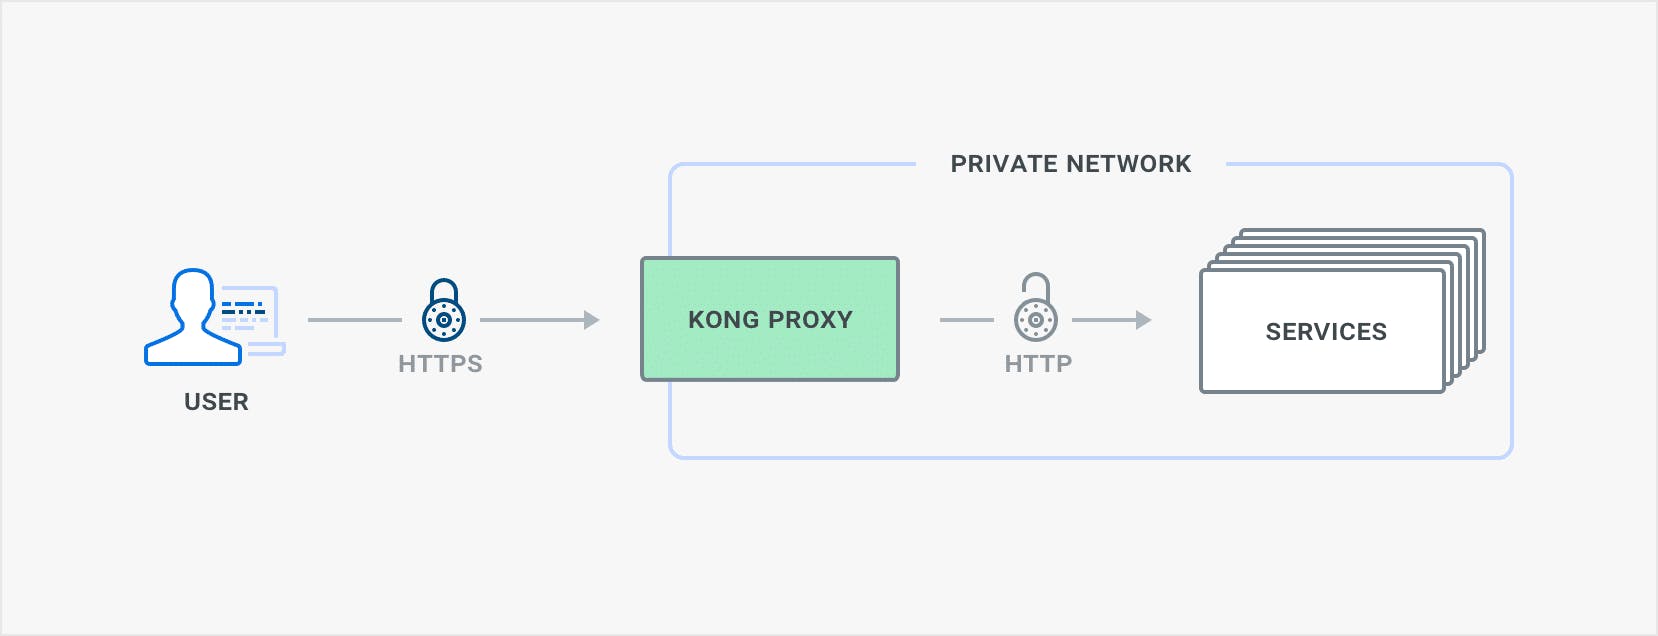 TCP support allows Kong to terminate TLS connections